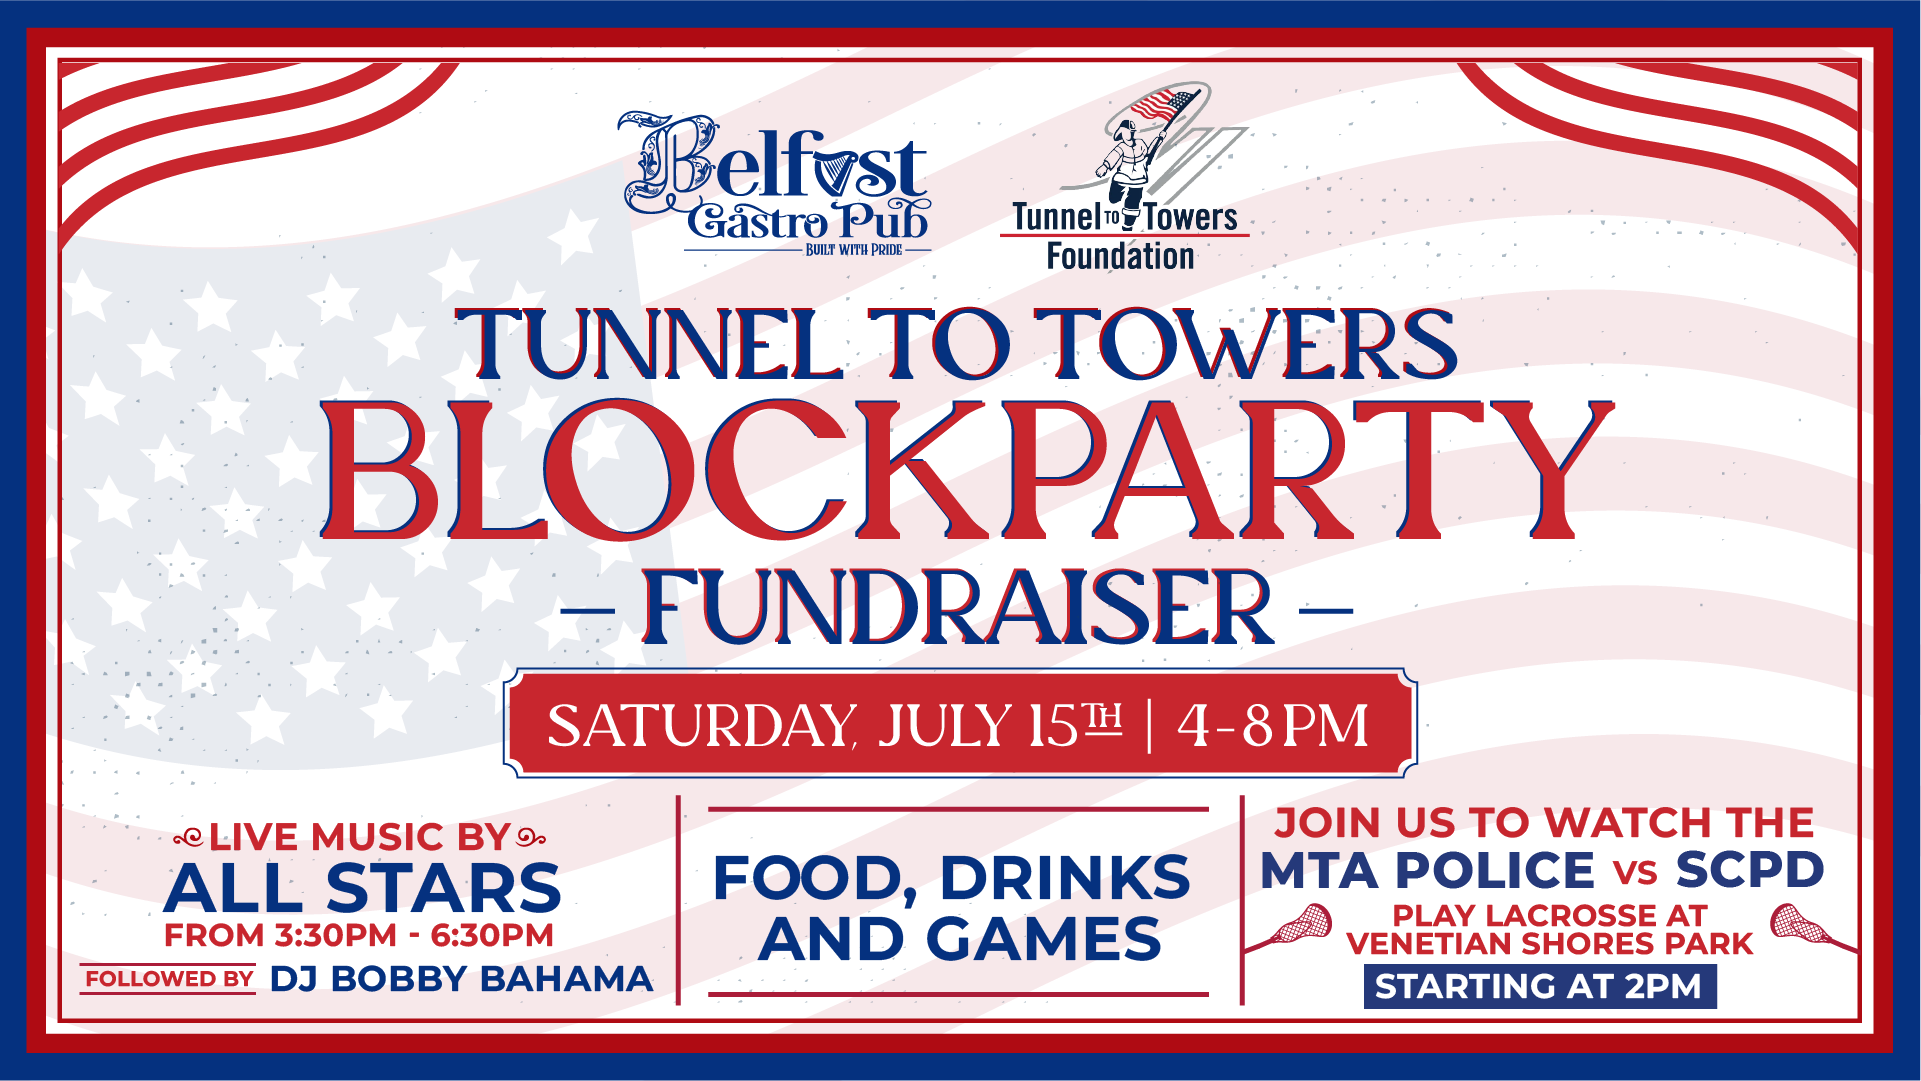 Tunnel to Towers Block Party Fundraiser — Belfast Gastropub